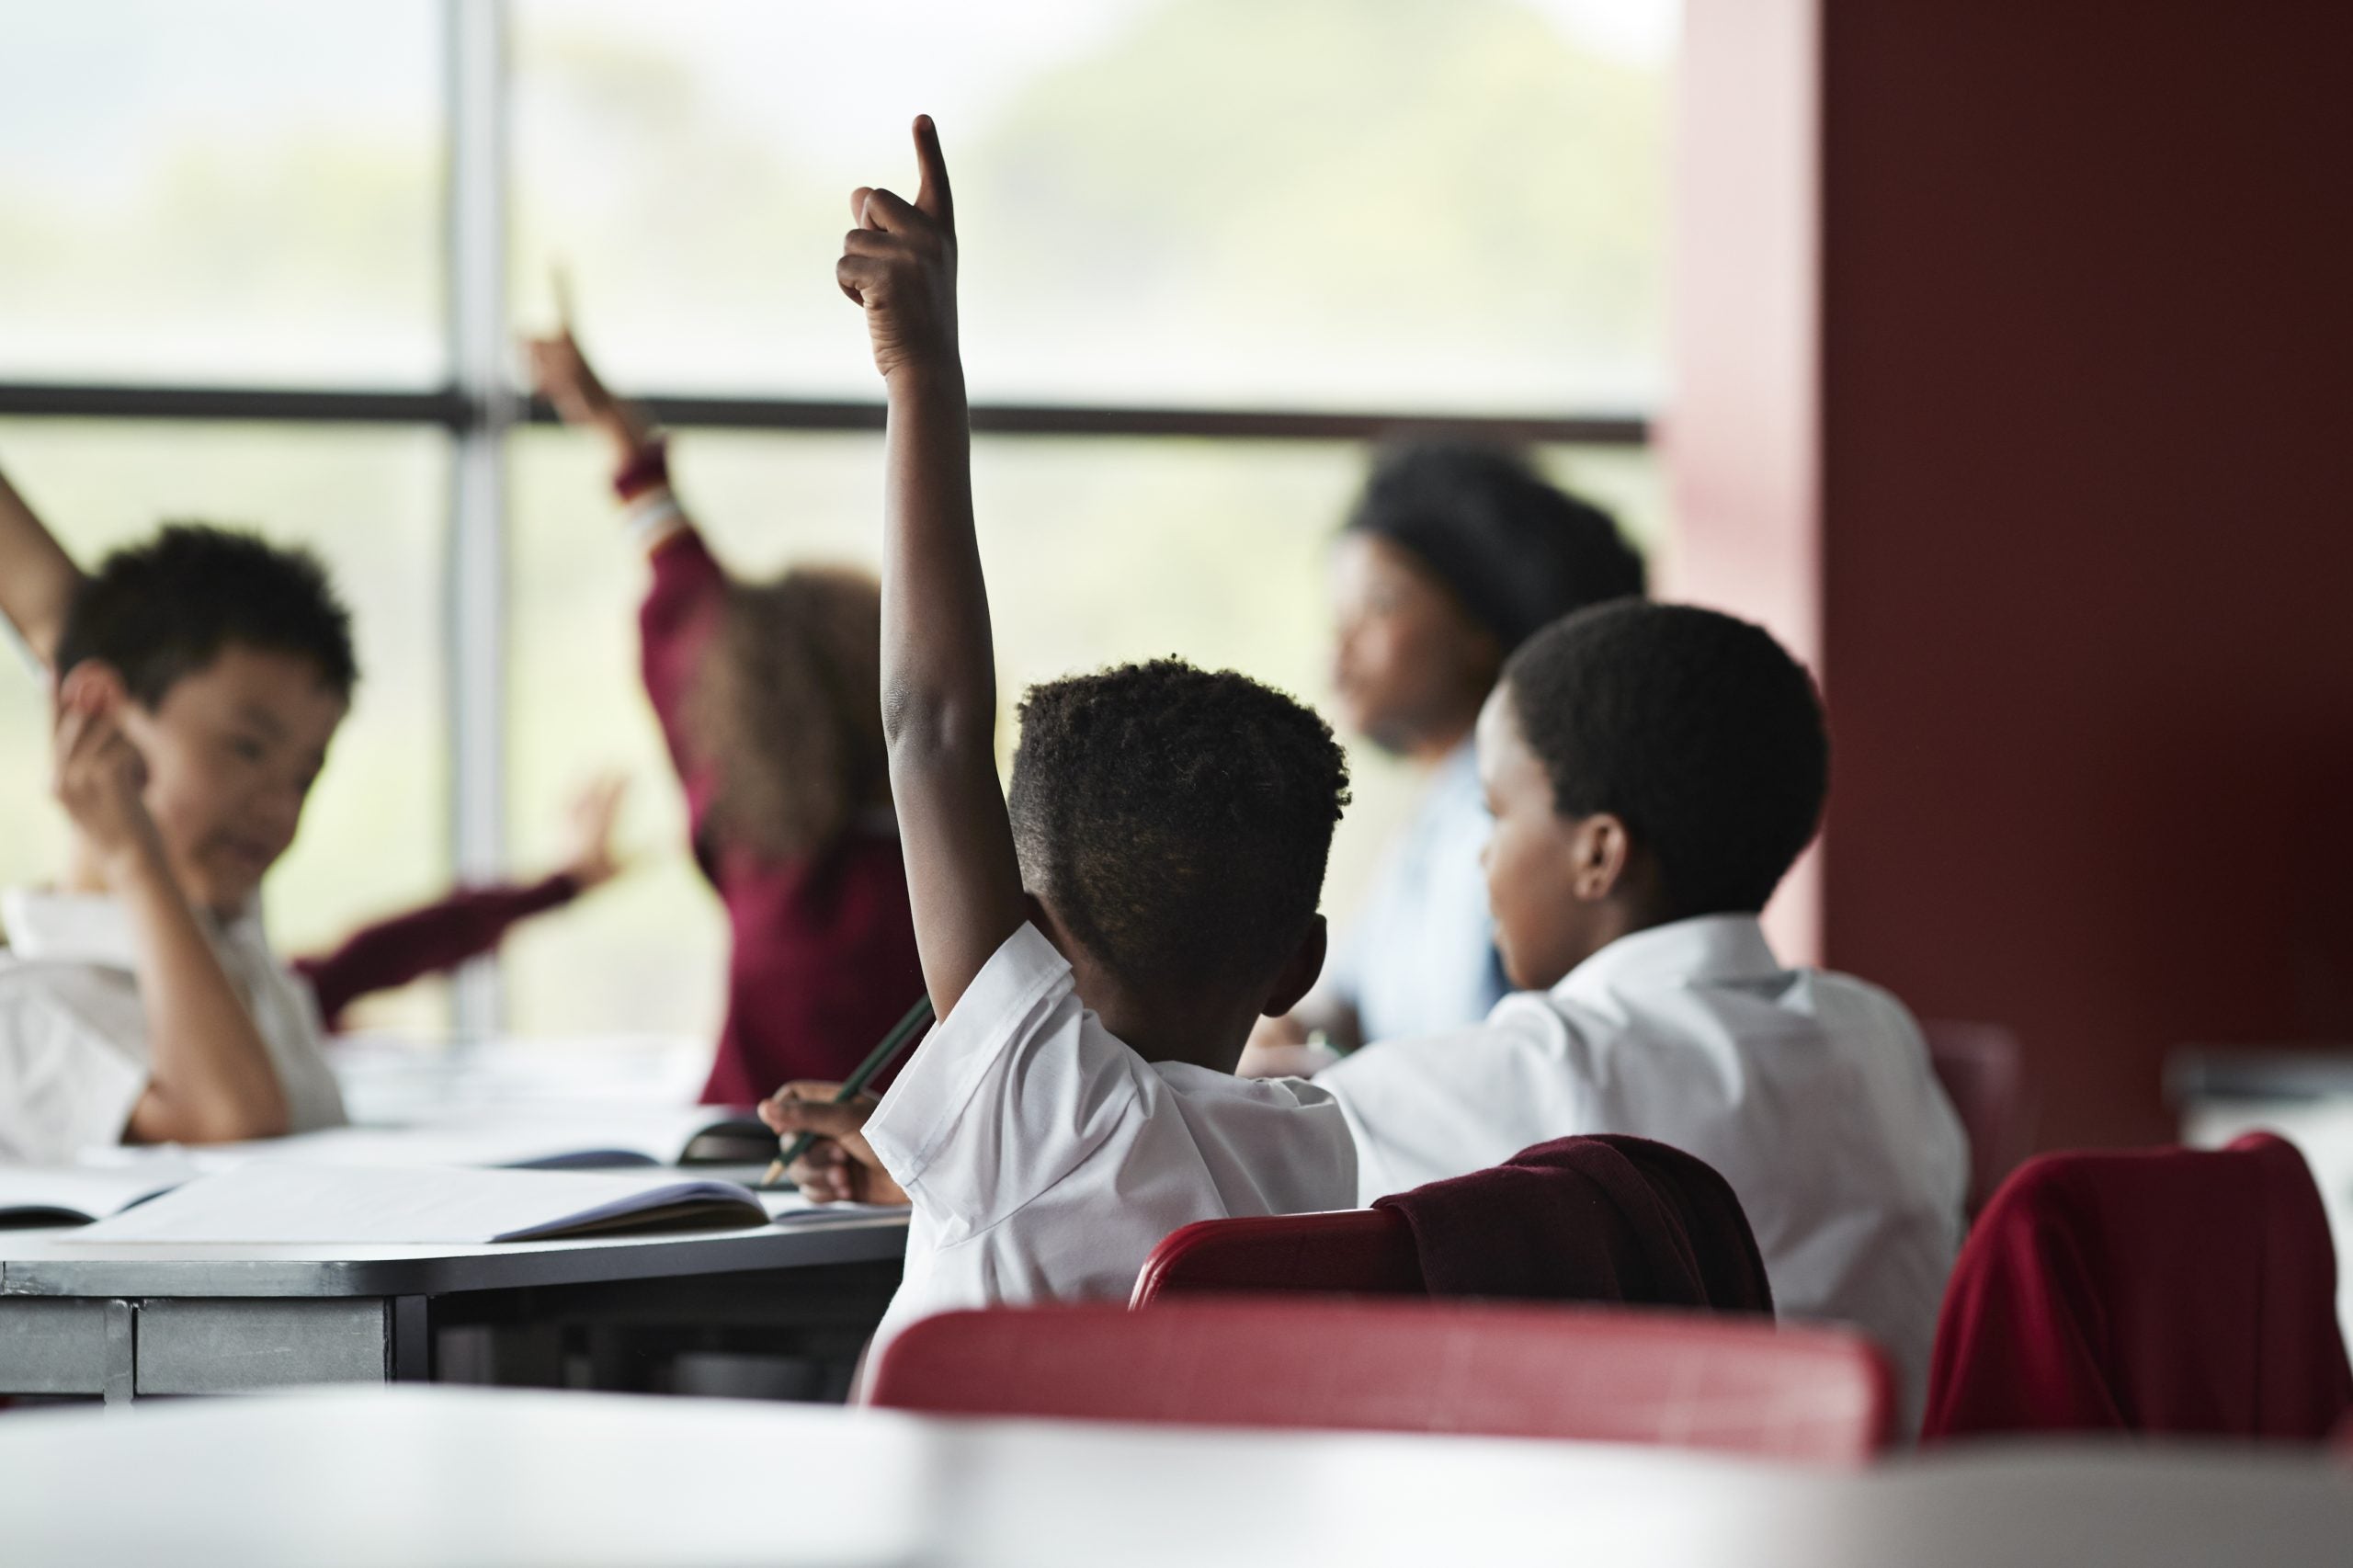 The Gates Foundation Announces $1.1 Billion Investment in Math Education For Black and Latinx Students